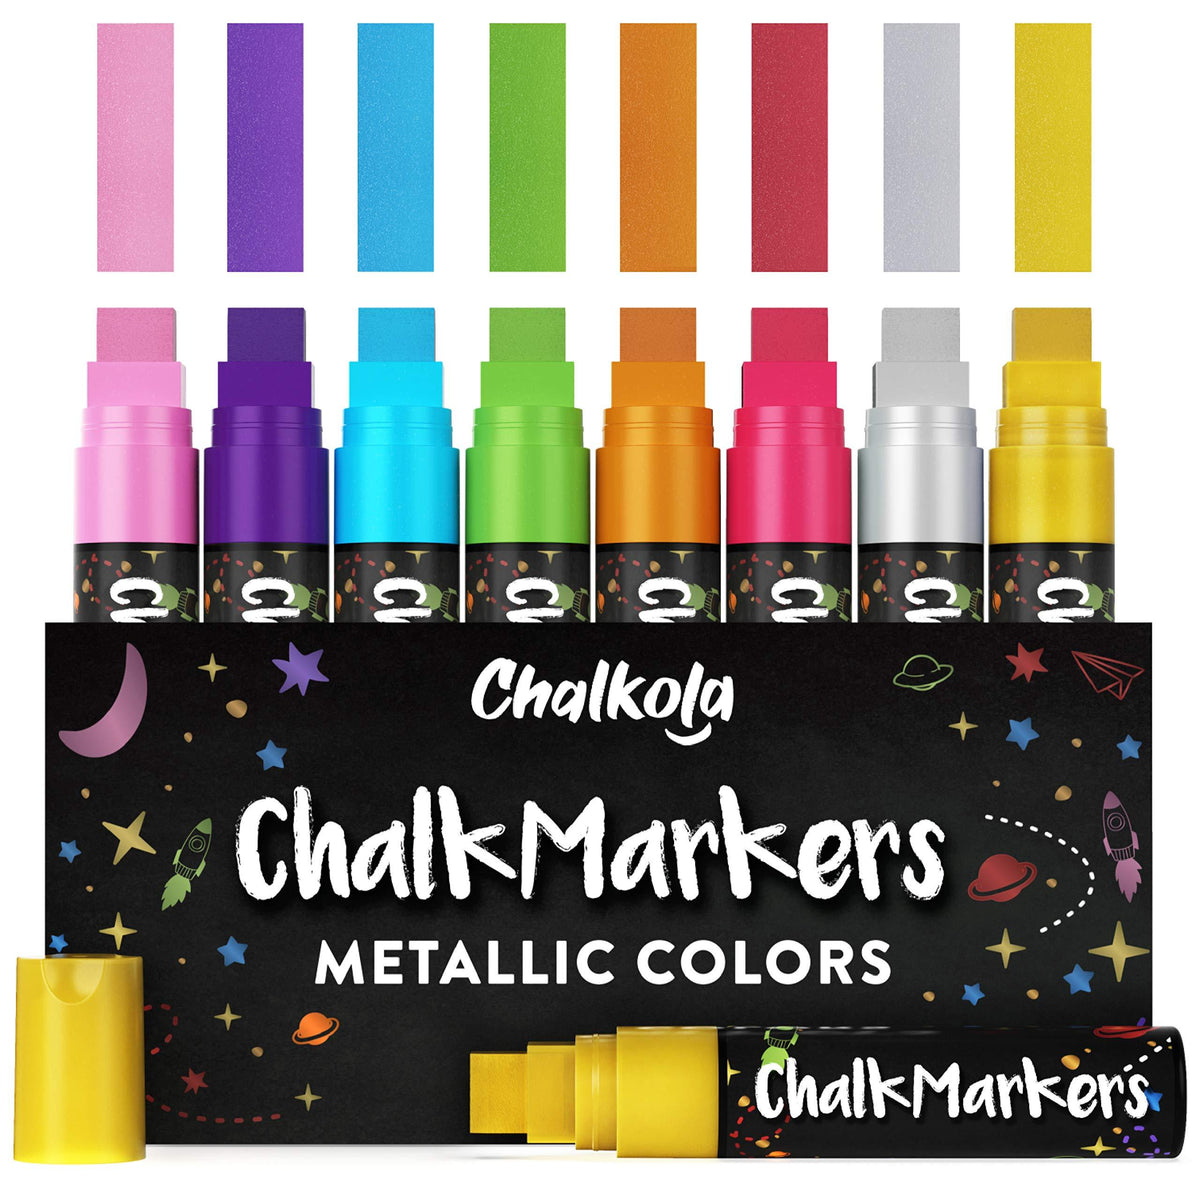 Jumbo Color Chalk Markers with 15mm Nib - Pack of 8 Pens Metallic 